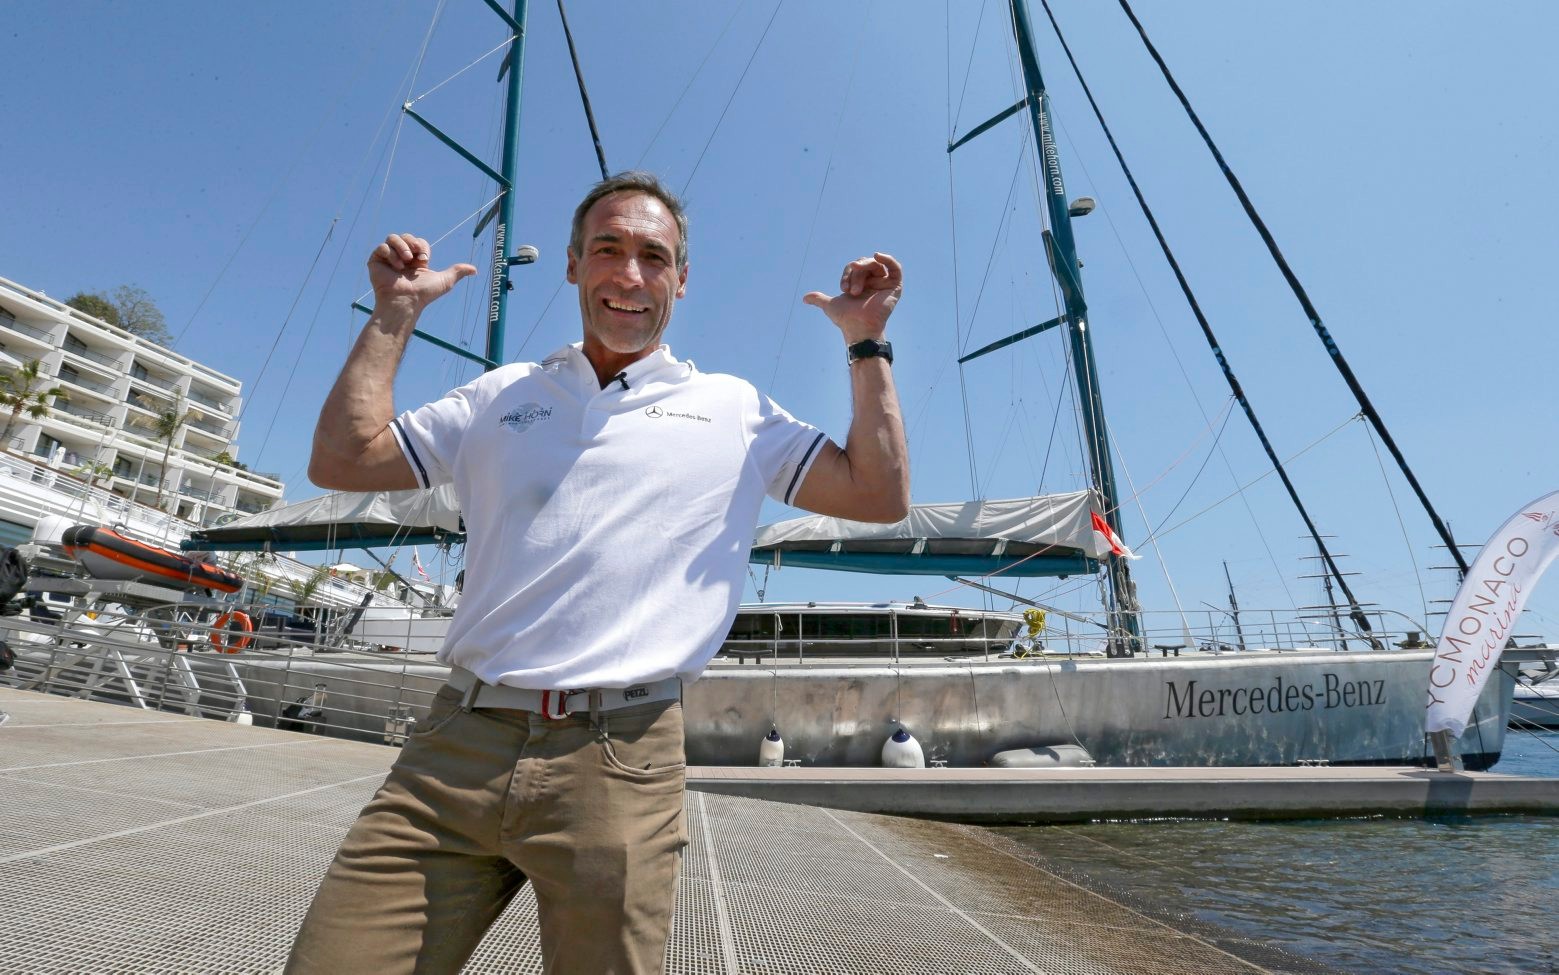 South African born, Swiss explorer and adventurer Mike Horn poses in front of his exploration yacht, "Pangaea" ahead of his expedition Pole2Pole to circumnavigate the world via the two poles, in Monaco, Friday, May 6, 2016. Mike Horn will set off on Sunday, May 8 from Monaco harbour. (AP Photo/Lionel Cironneau) Monaco Mike Horn